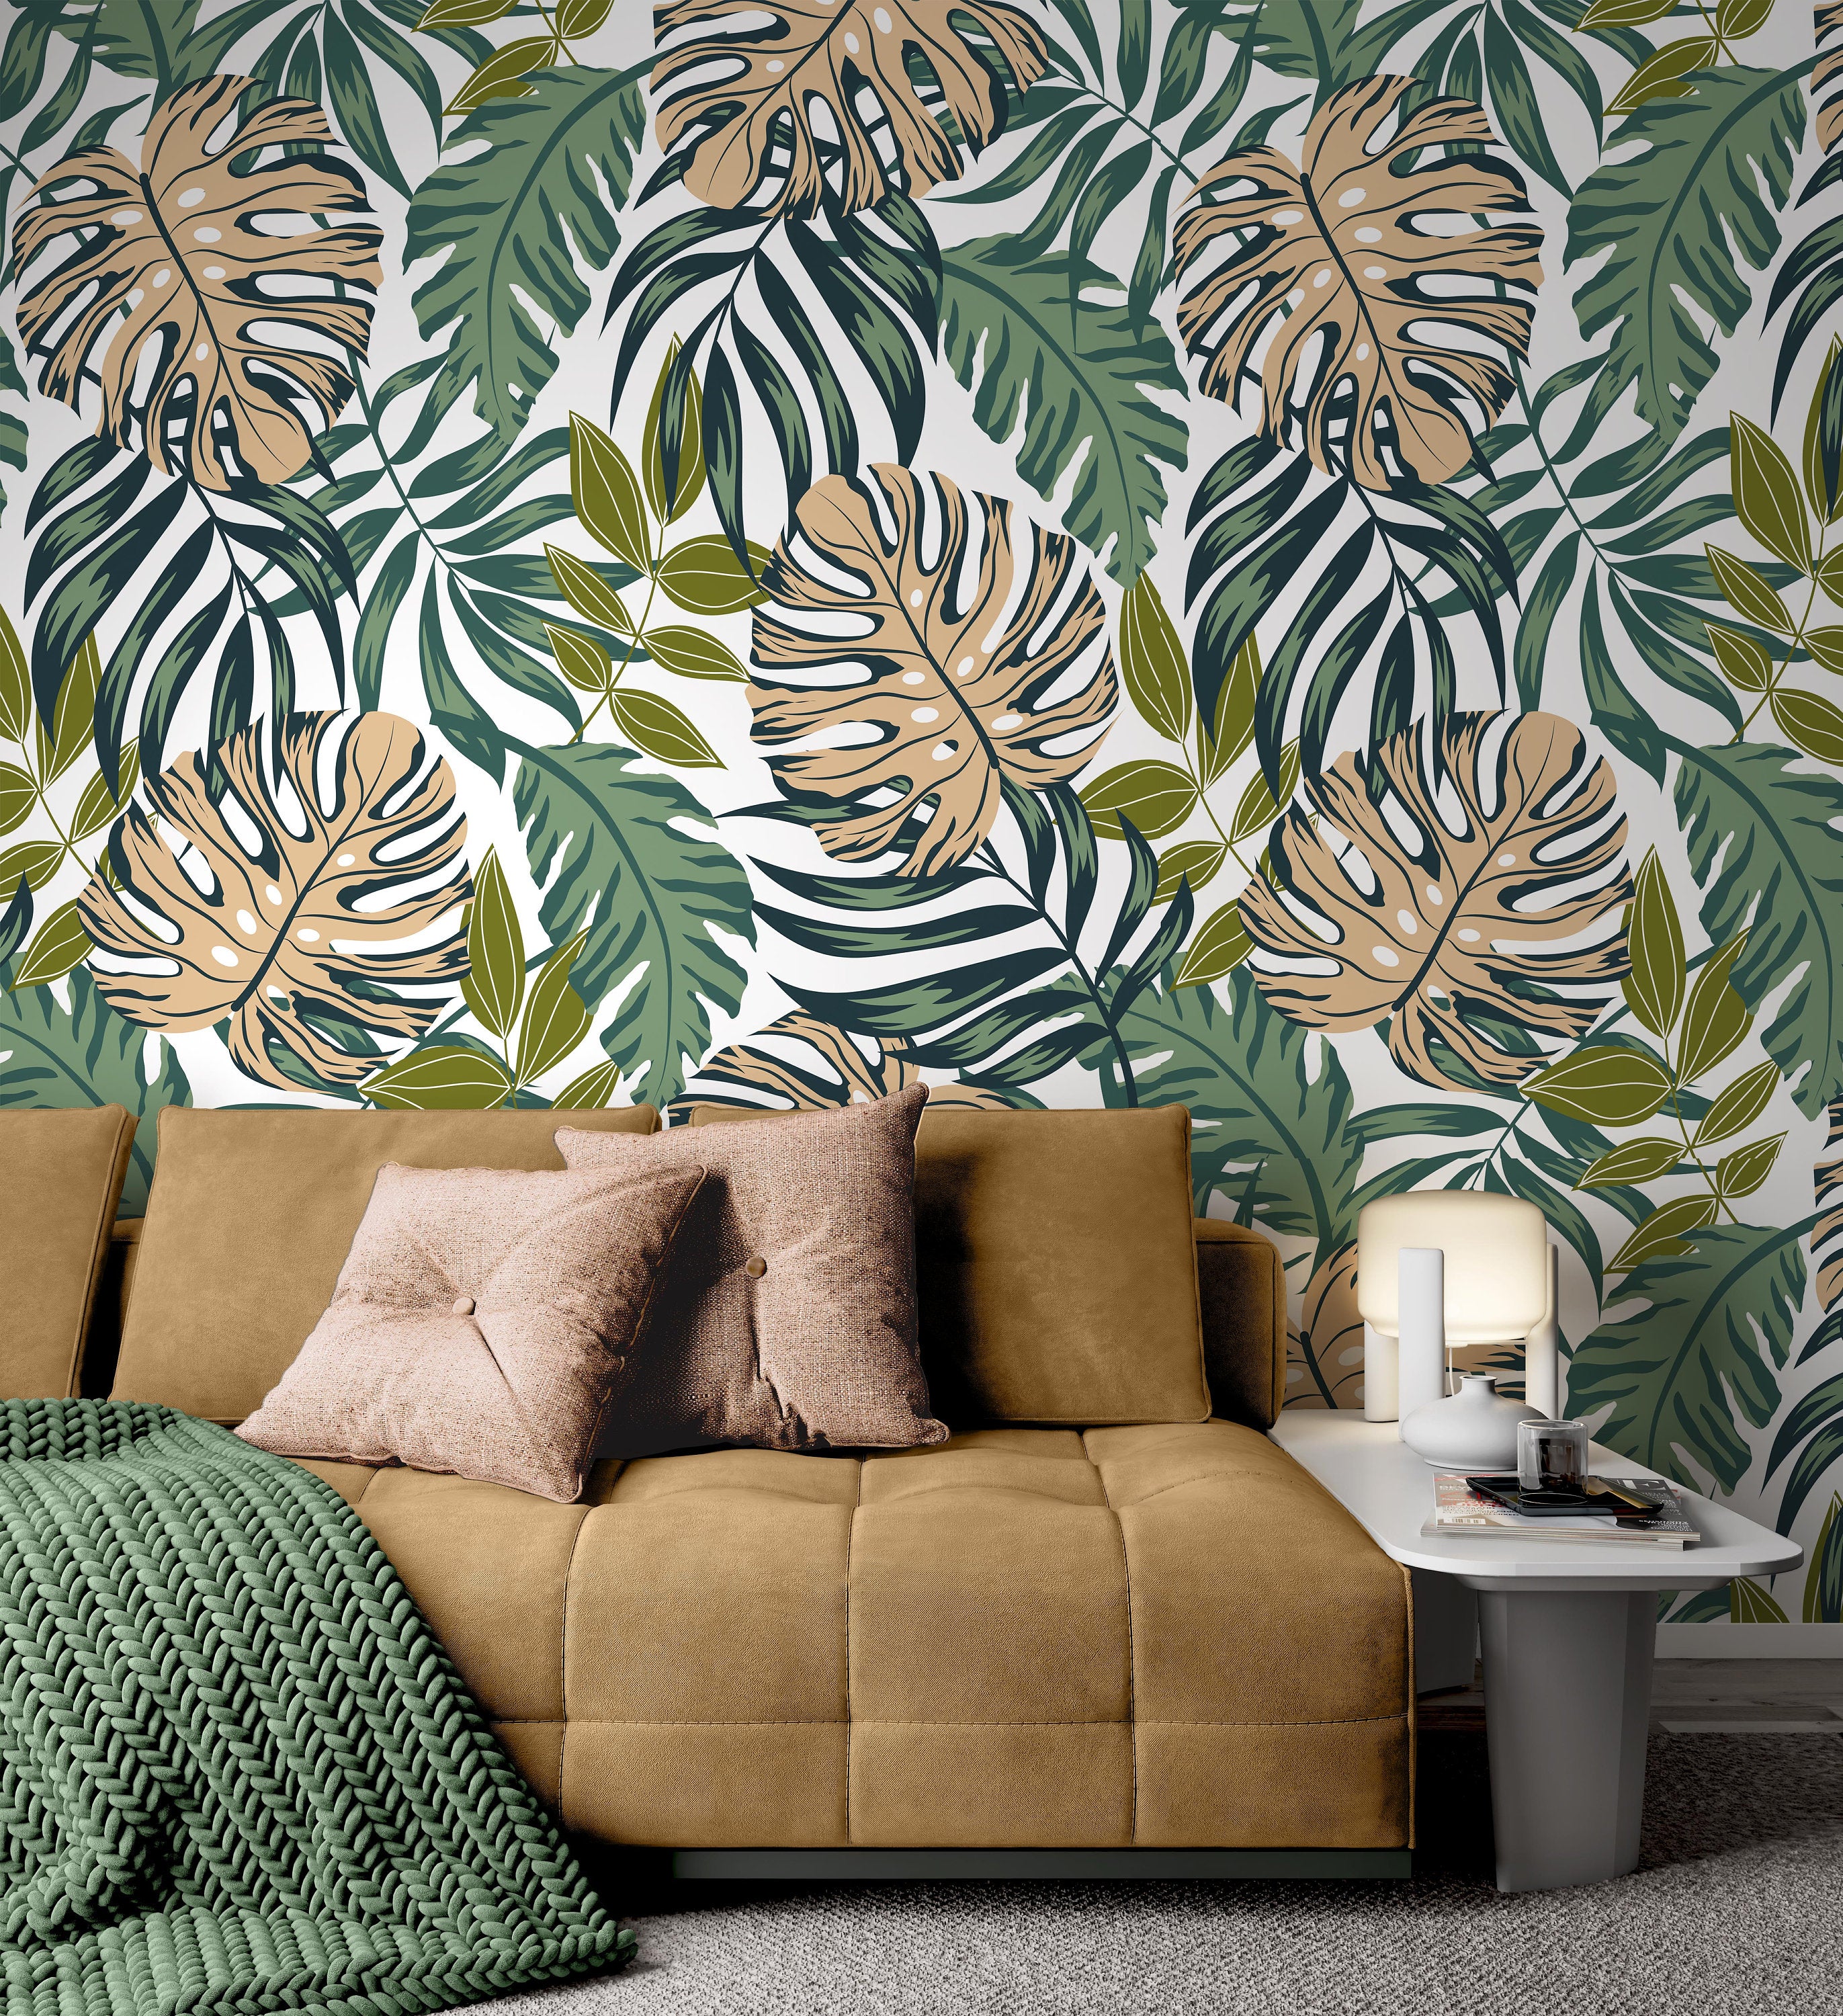 Summer Trend Tropical Exotic Leaves and Bright Plants Wallpaper Self Adhesive Peel and Stick Wall Sticker Wall Decoration Removable